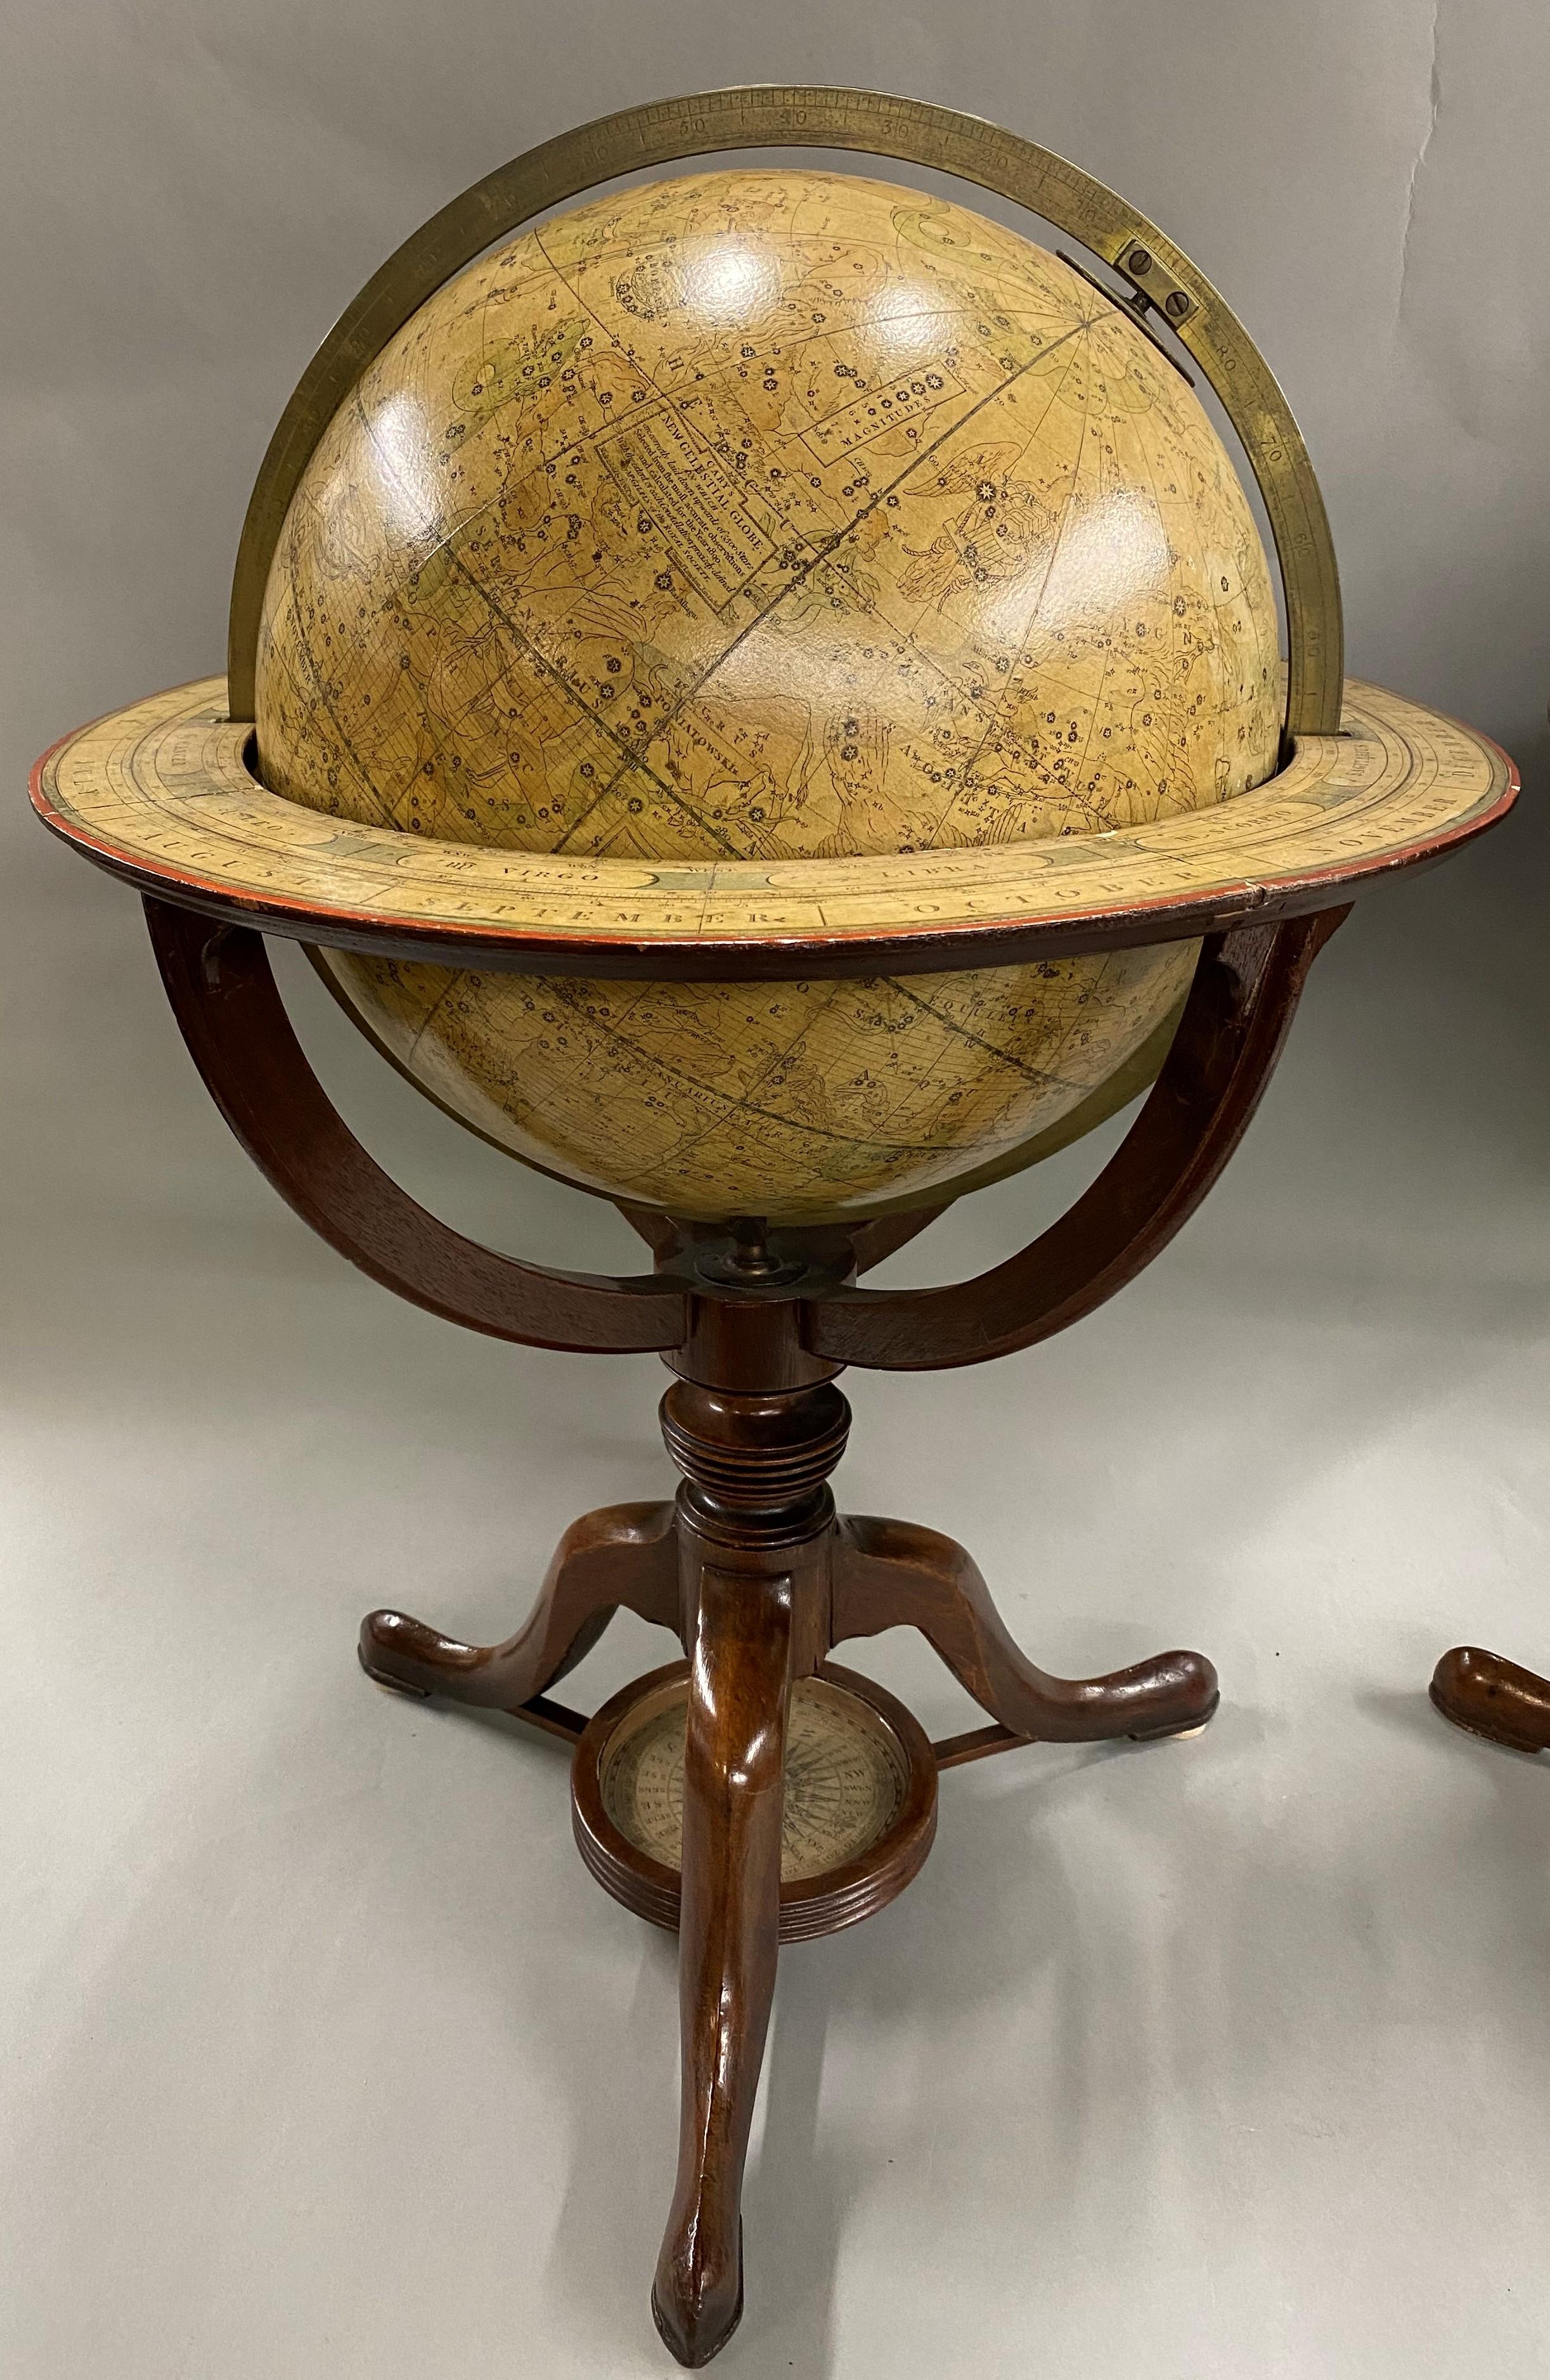 A fine pair of tabletop globes on stands, the left hand colored Celestial globe with cartouche which reads “Cary's New Celestial Globe on which are correctly laid down upwards of 3500 Stars Selected from the most accurate observations and calculated